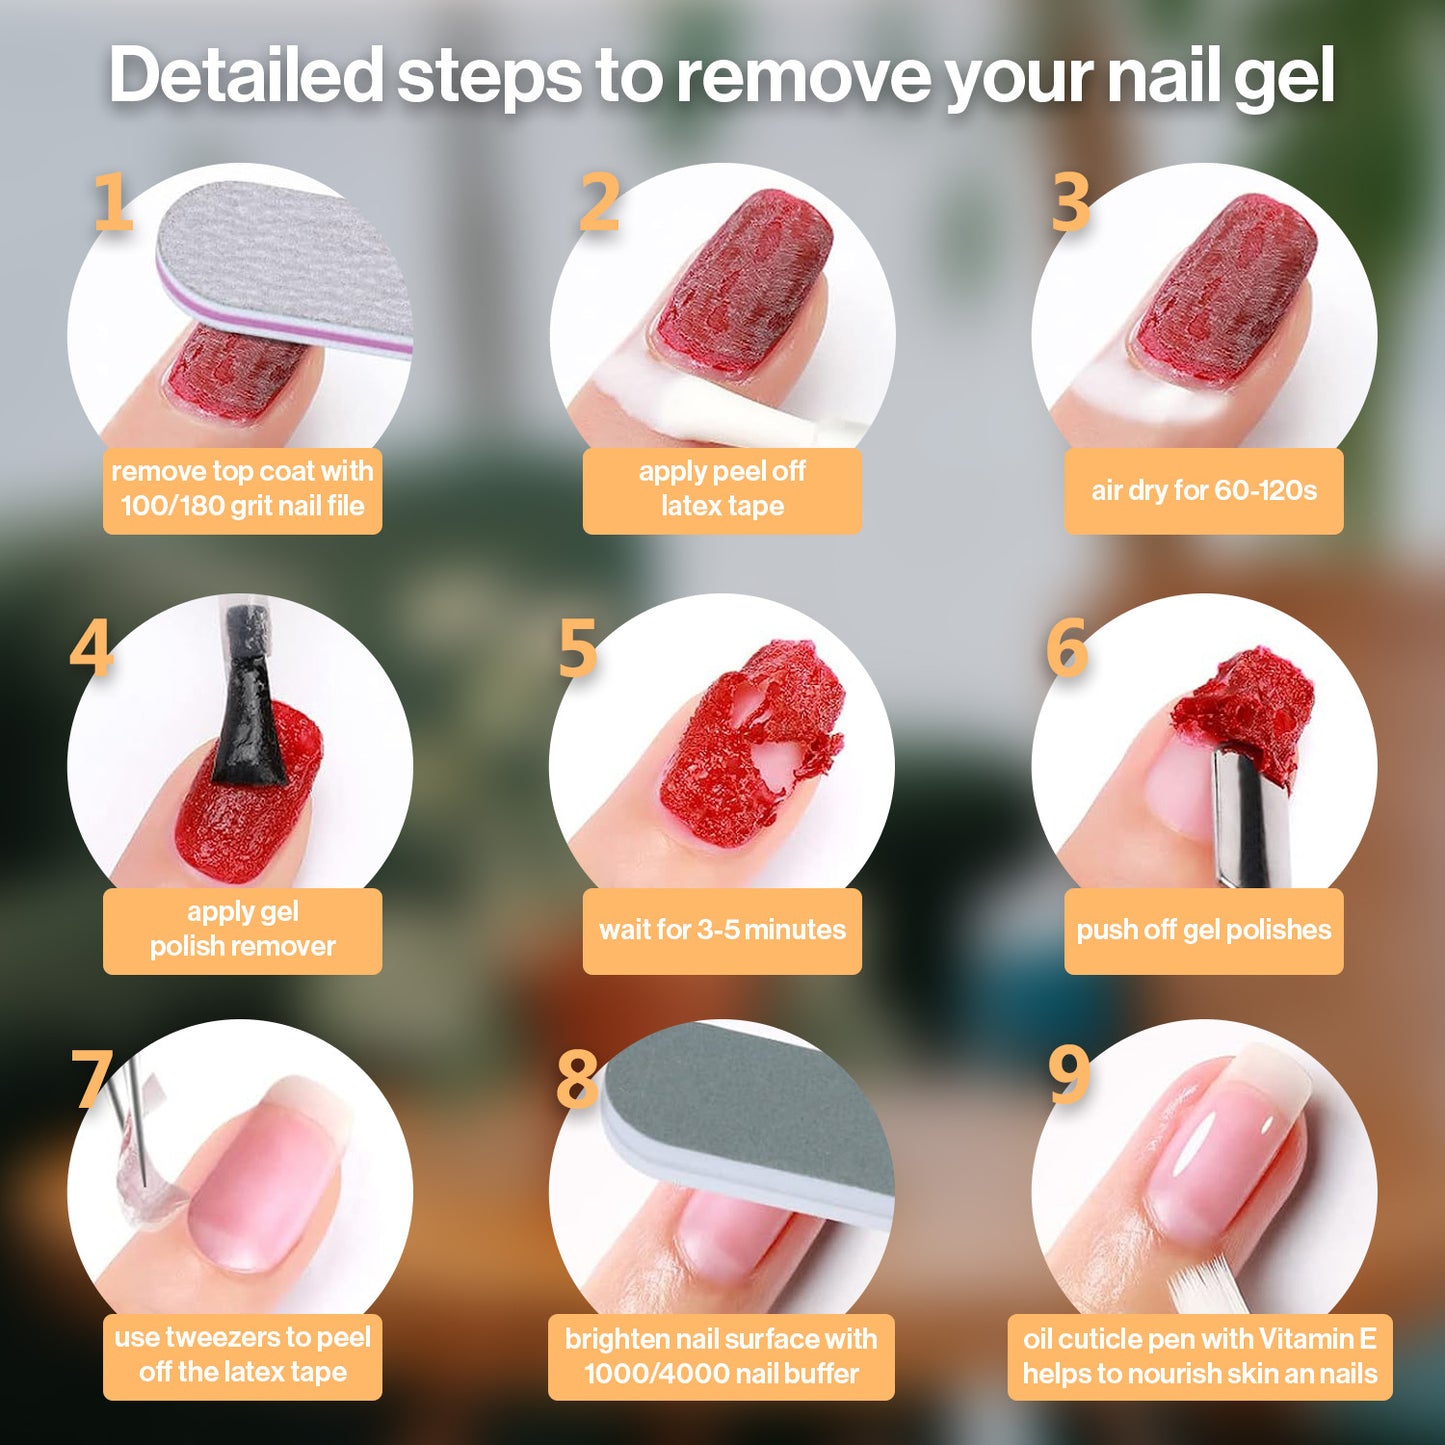 Step-by-step guide to removing polygel at home. Steps include: removing top coat with a nail file, applying peel-off latex tape, air-drying for 60-120 seconds, applying gel polish remover, waiting for 3-5 minutes, pushing off gel polishes, using tweezers to peel off the latex tape, brightening nail surface with a nail buffer, and using cuticle oil to nourish skin and nails.